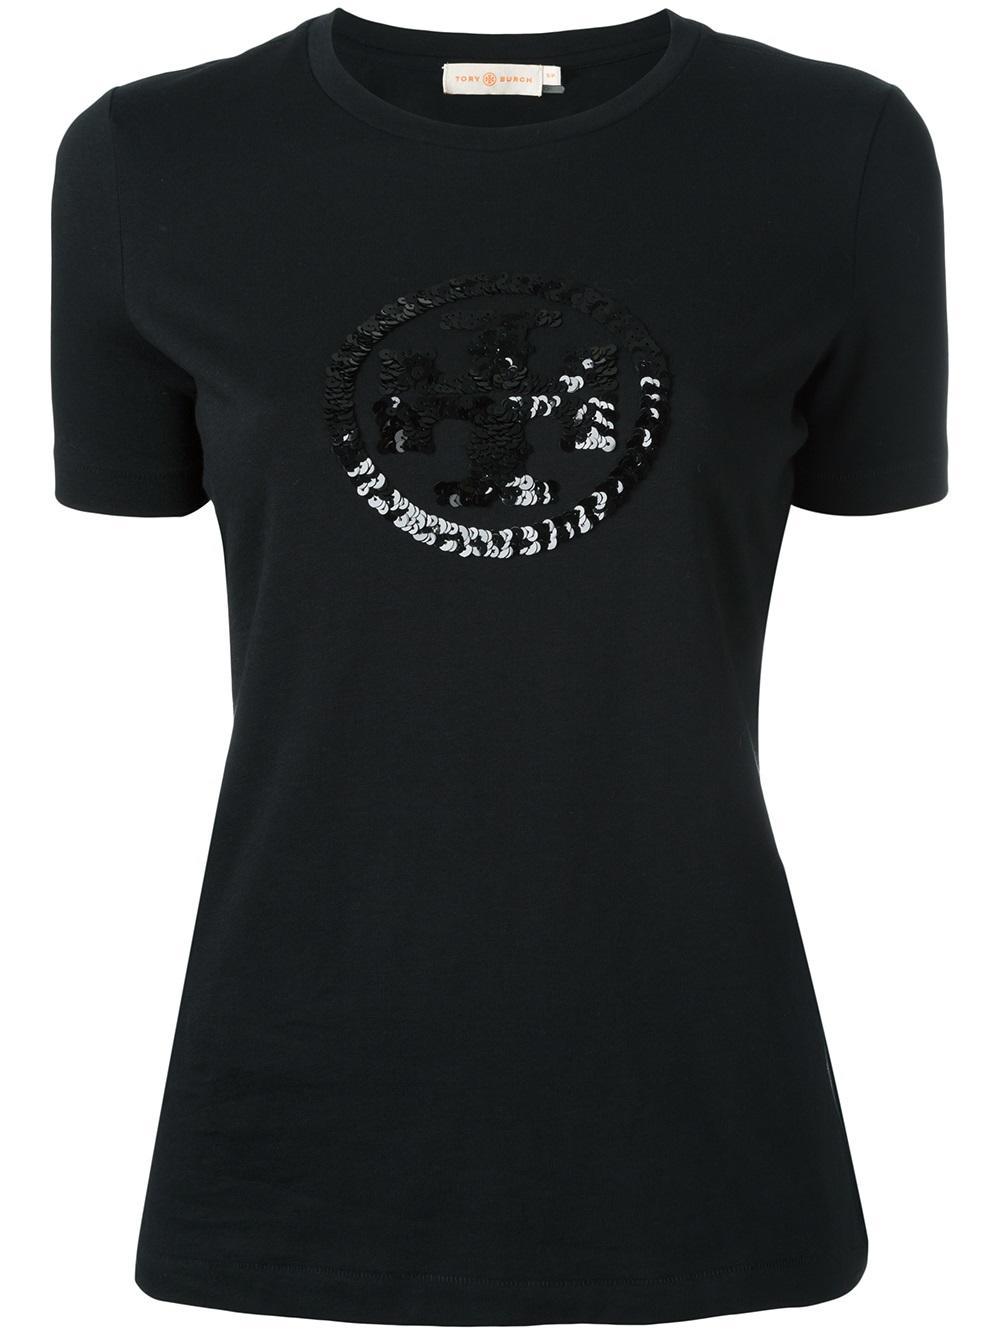 Tory Burch Sequined Logo T-shirt in Black - Lyst